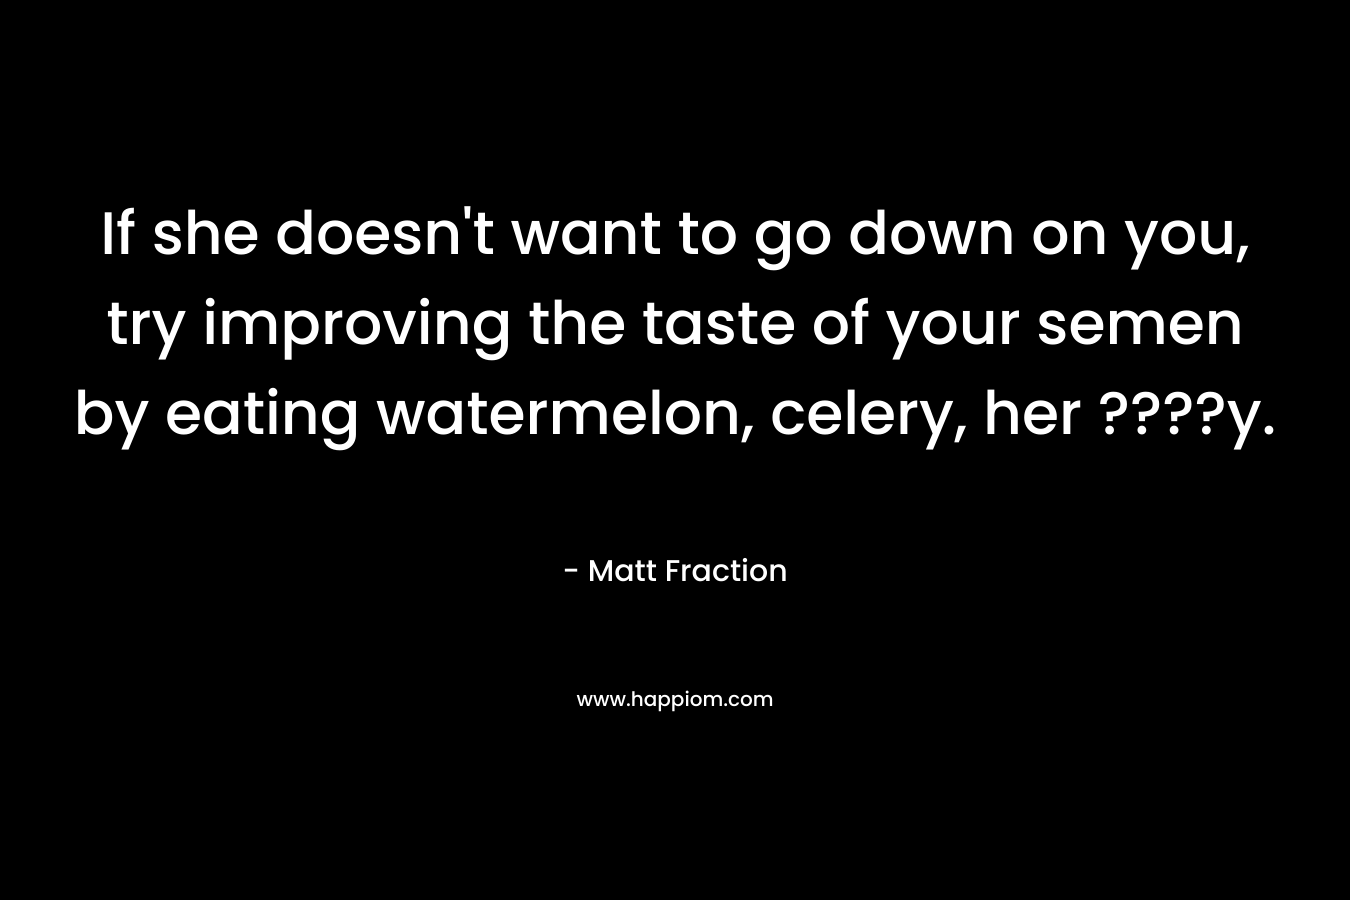 If she doesn’t want to go down on you, try improving the taste of your semen by eating watermelon, celery, her ????y. – Matt Fraction